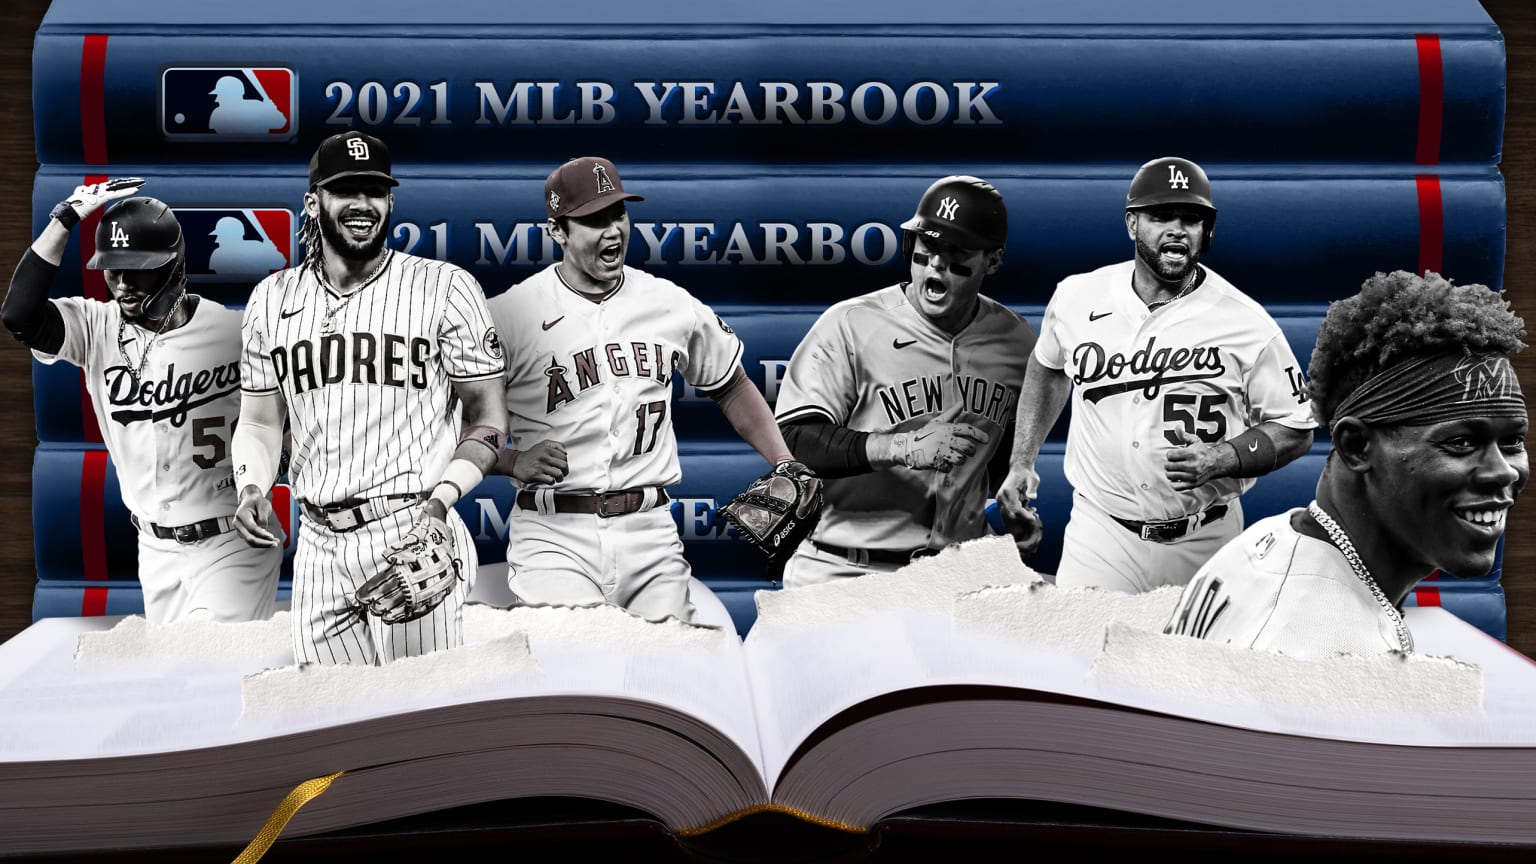 Ohtani, Tatis, Betts in 2021 MLB Yearbook